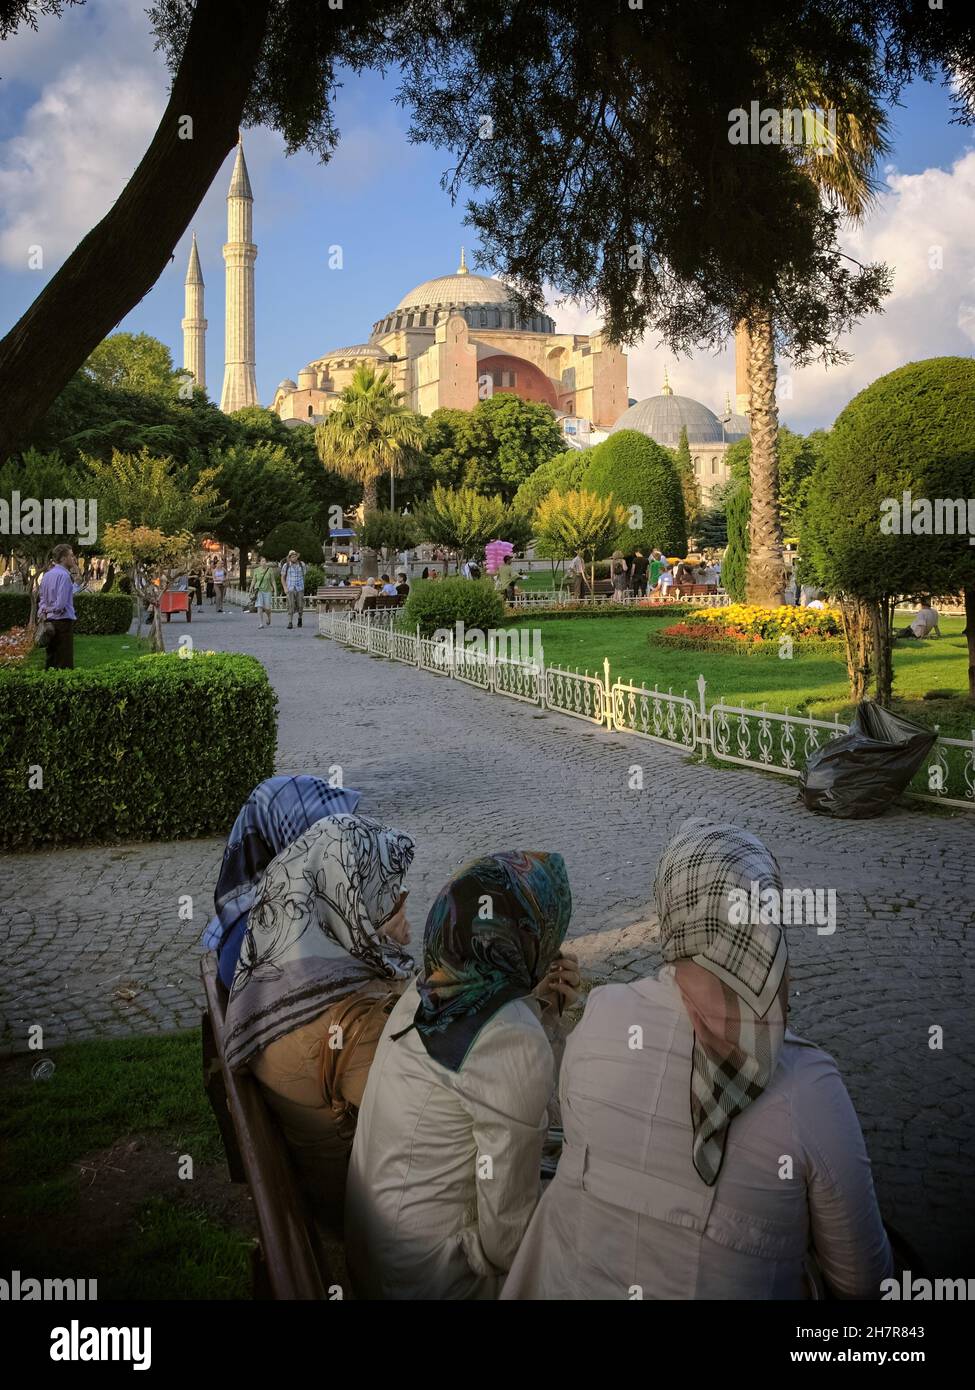 street scene of Istanbul women with headscarfs are sitting on a bench of Hagia Sophia Mosque's public garden Stock Photo